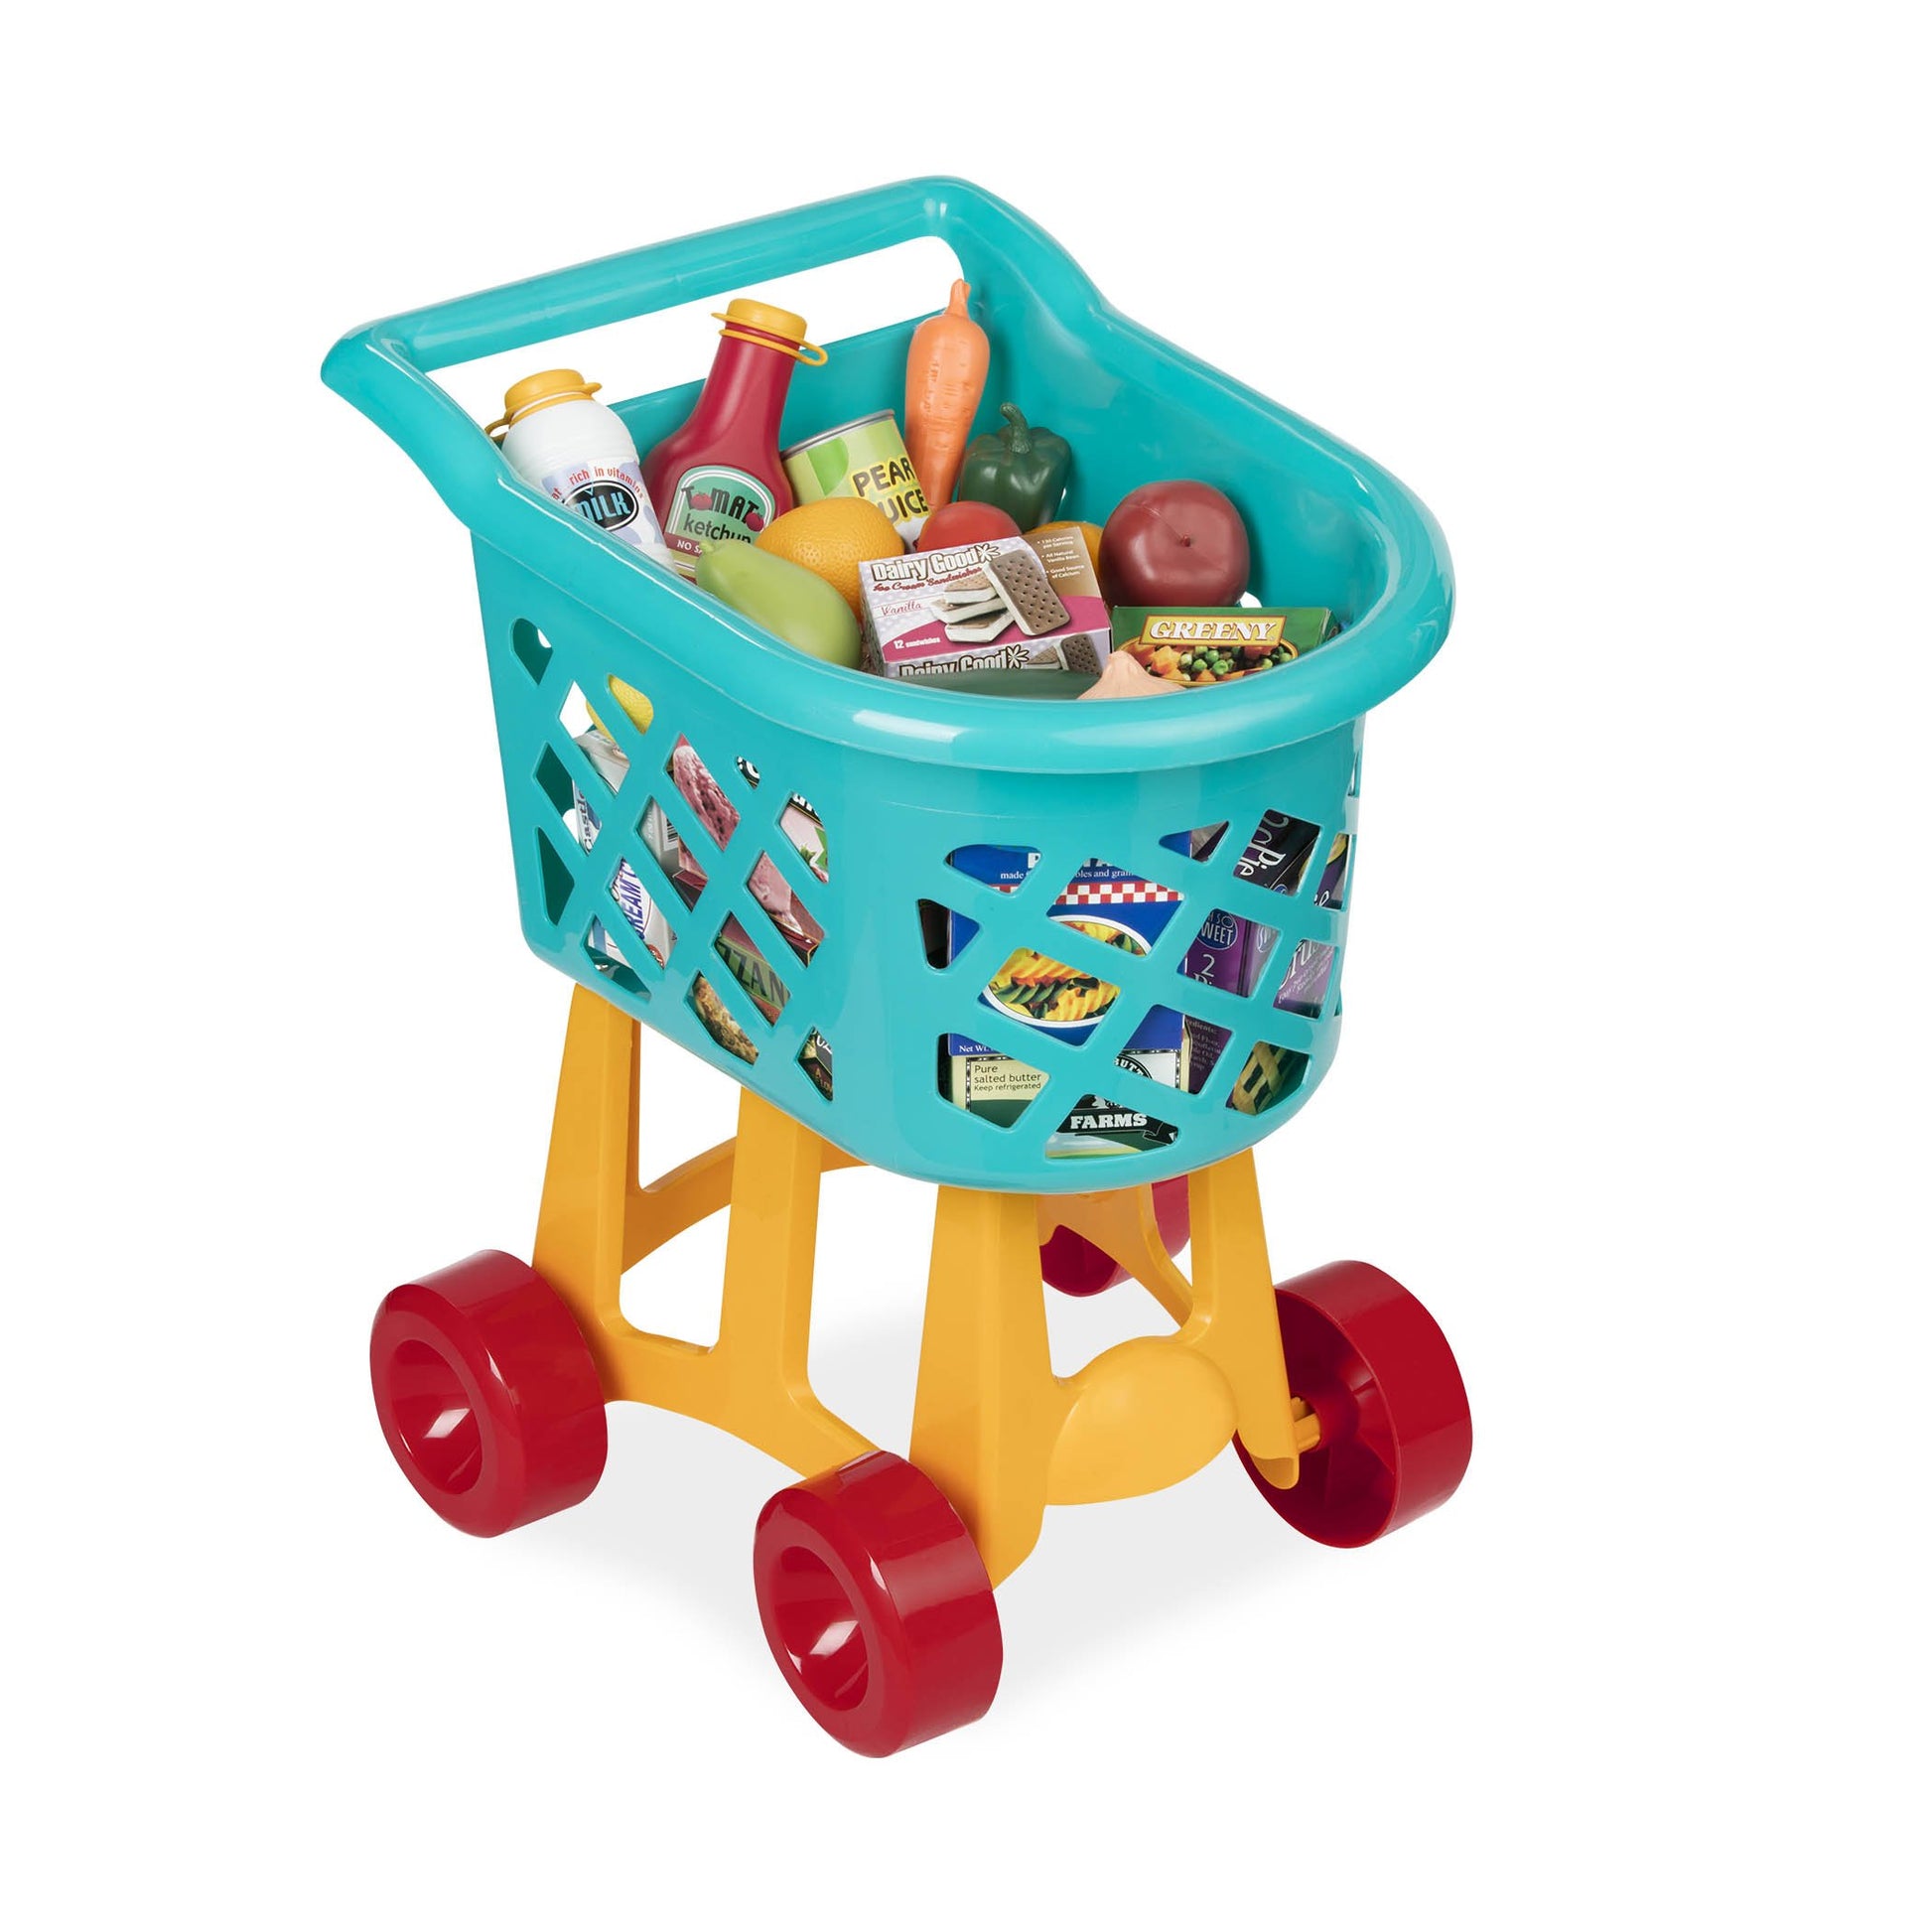 Battat Grocery Cart The Toy Wagon